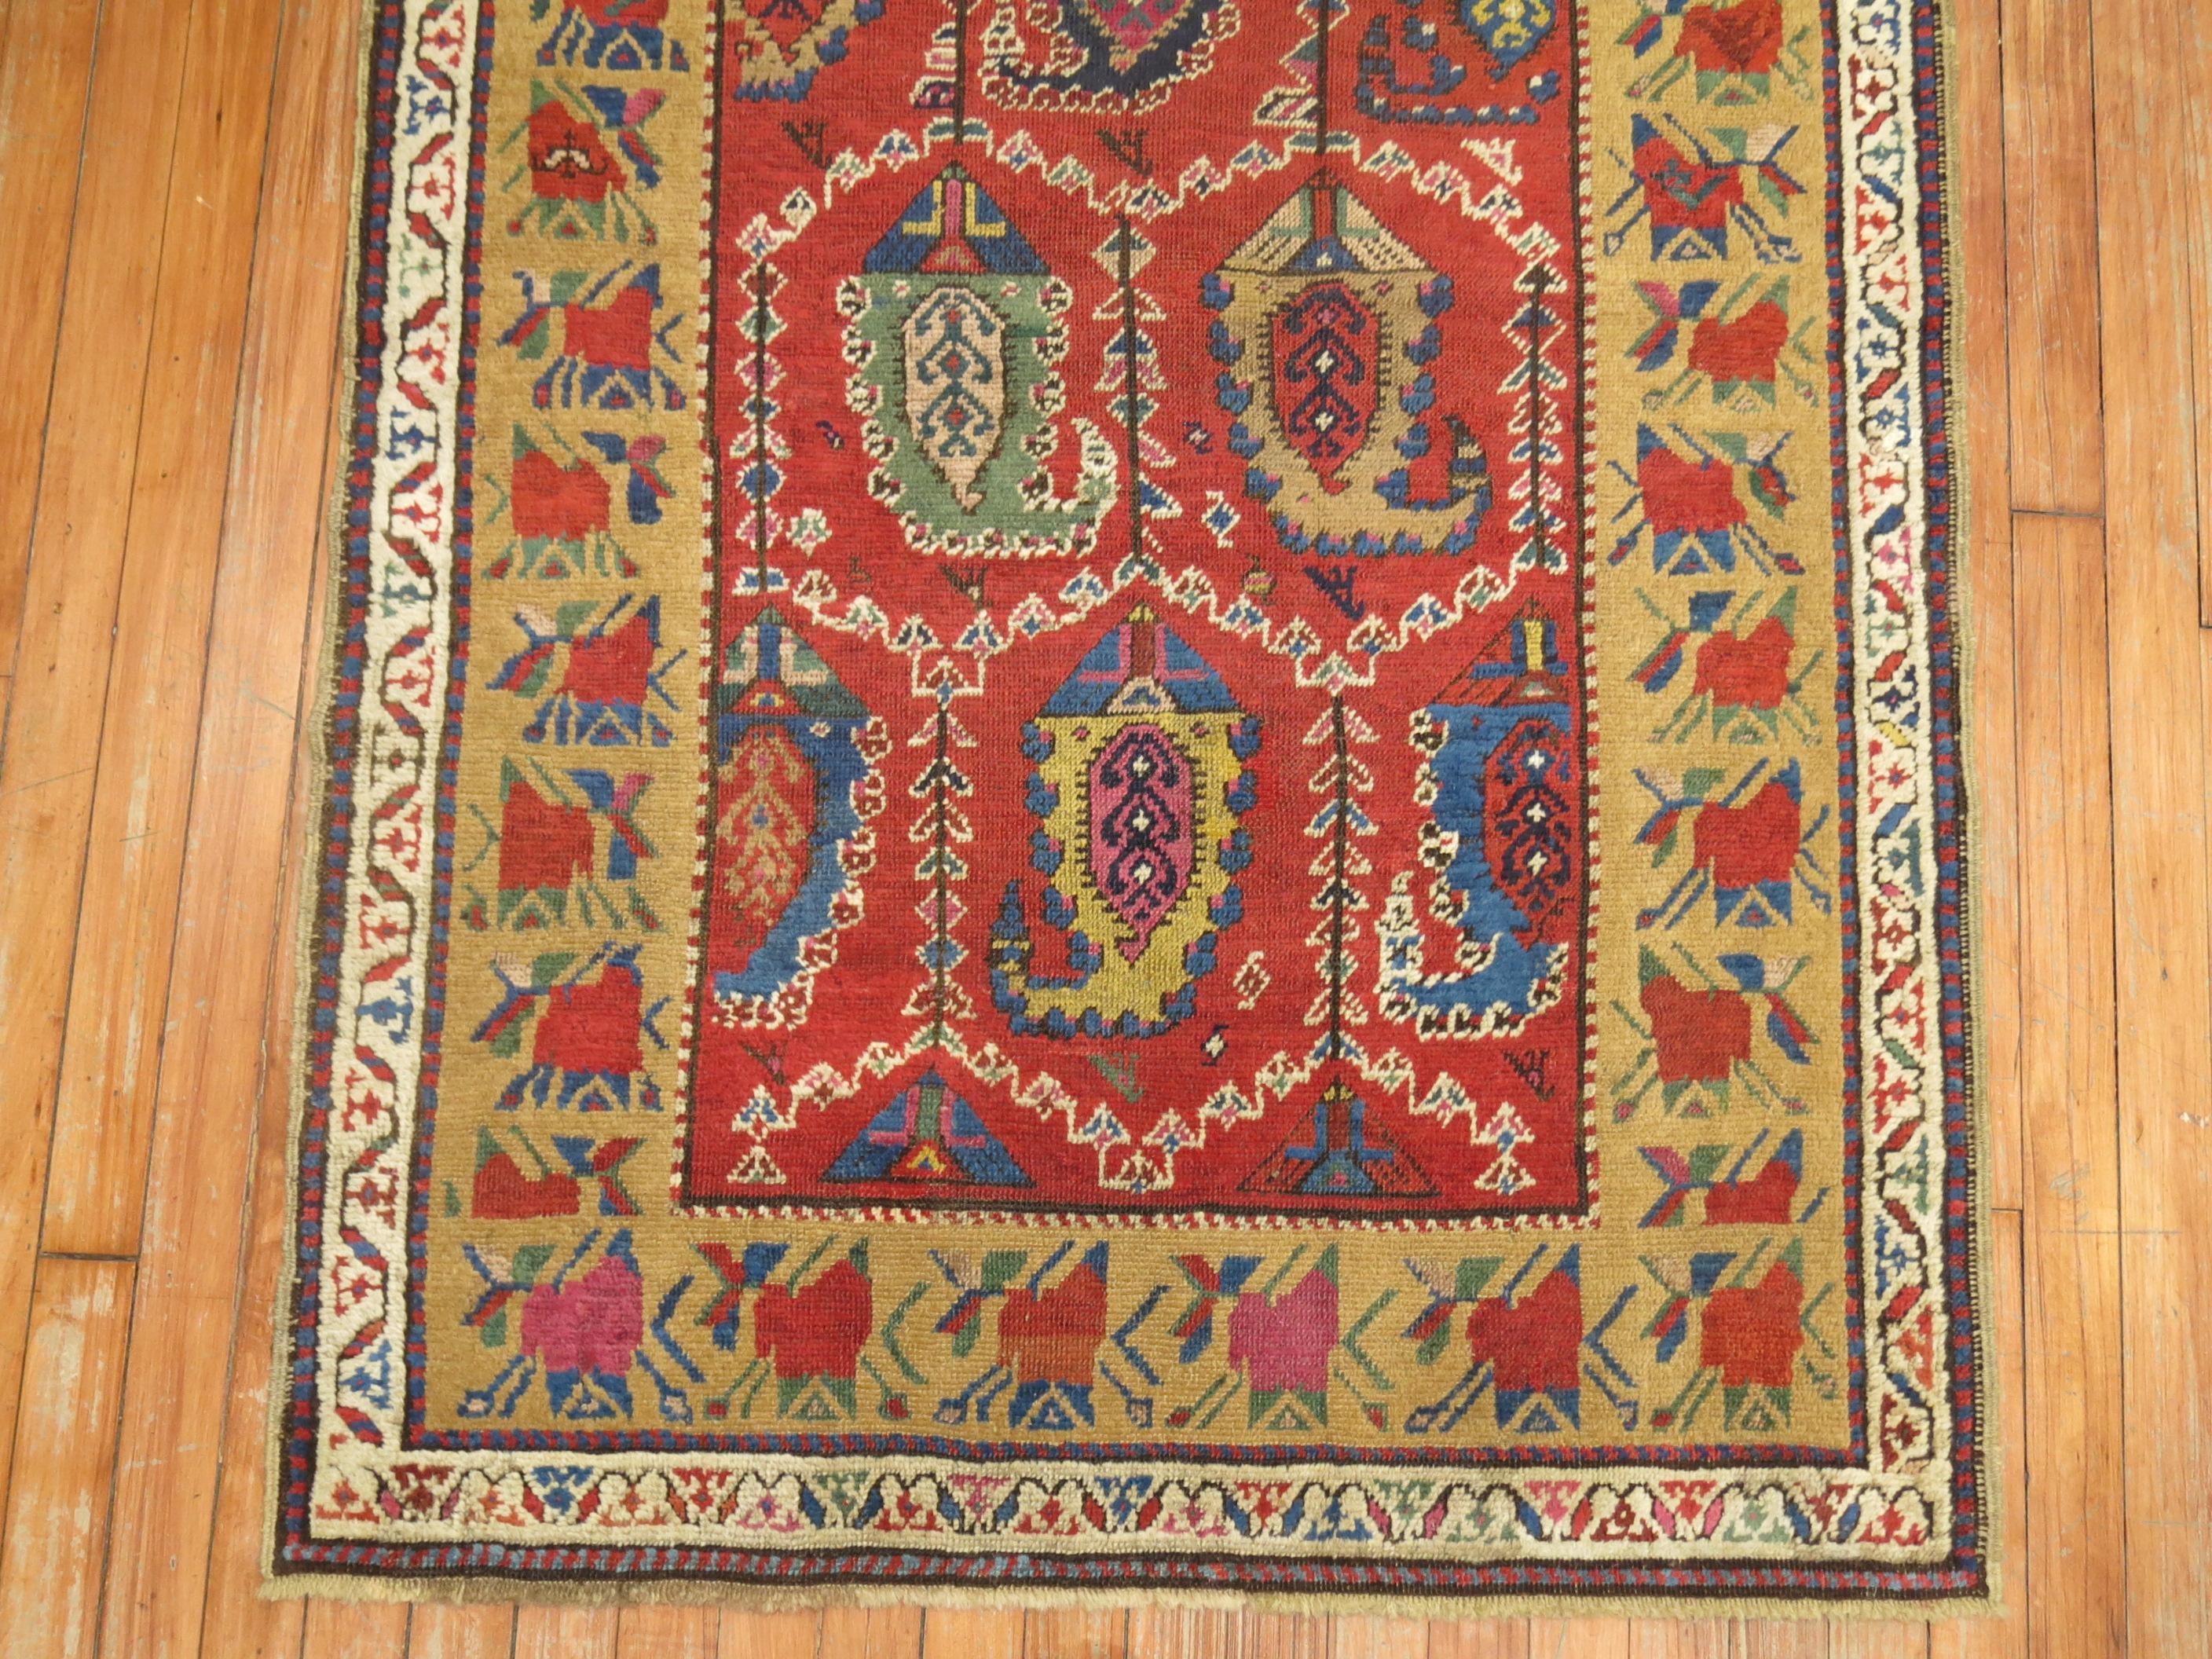 An early 20th century Caucasian Karabagh runner featuring a traditional paisley motif and floral border 

Measures: 3'4